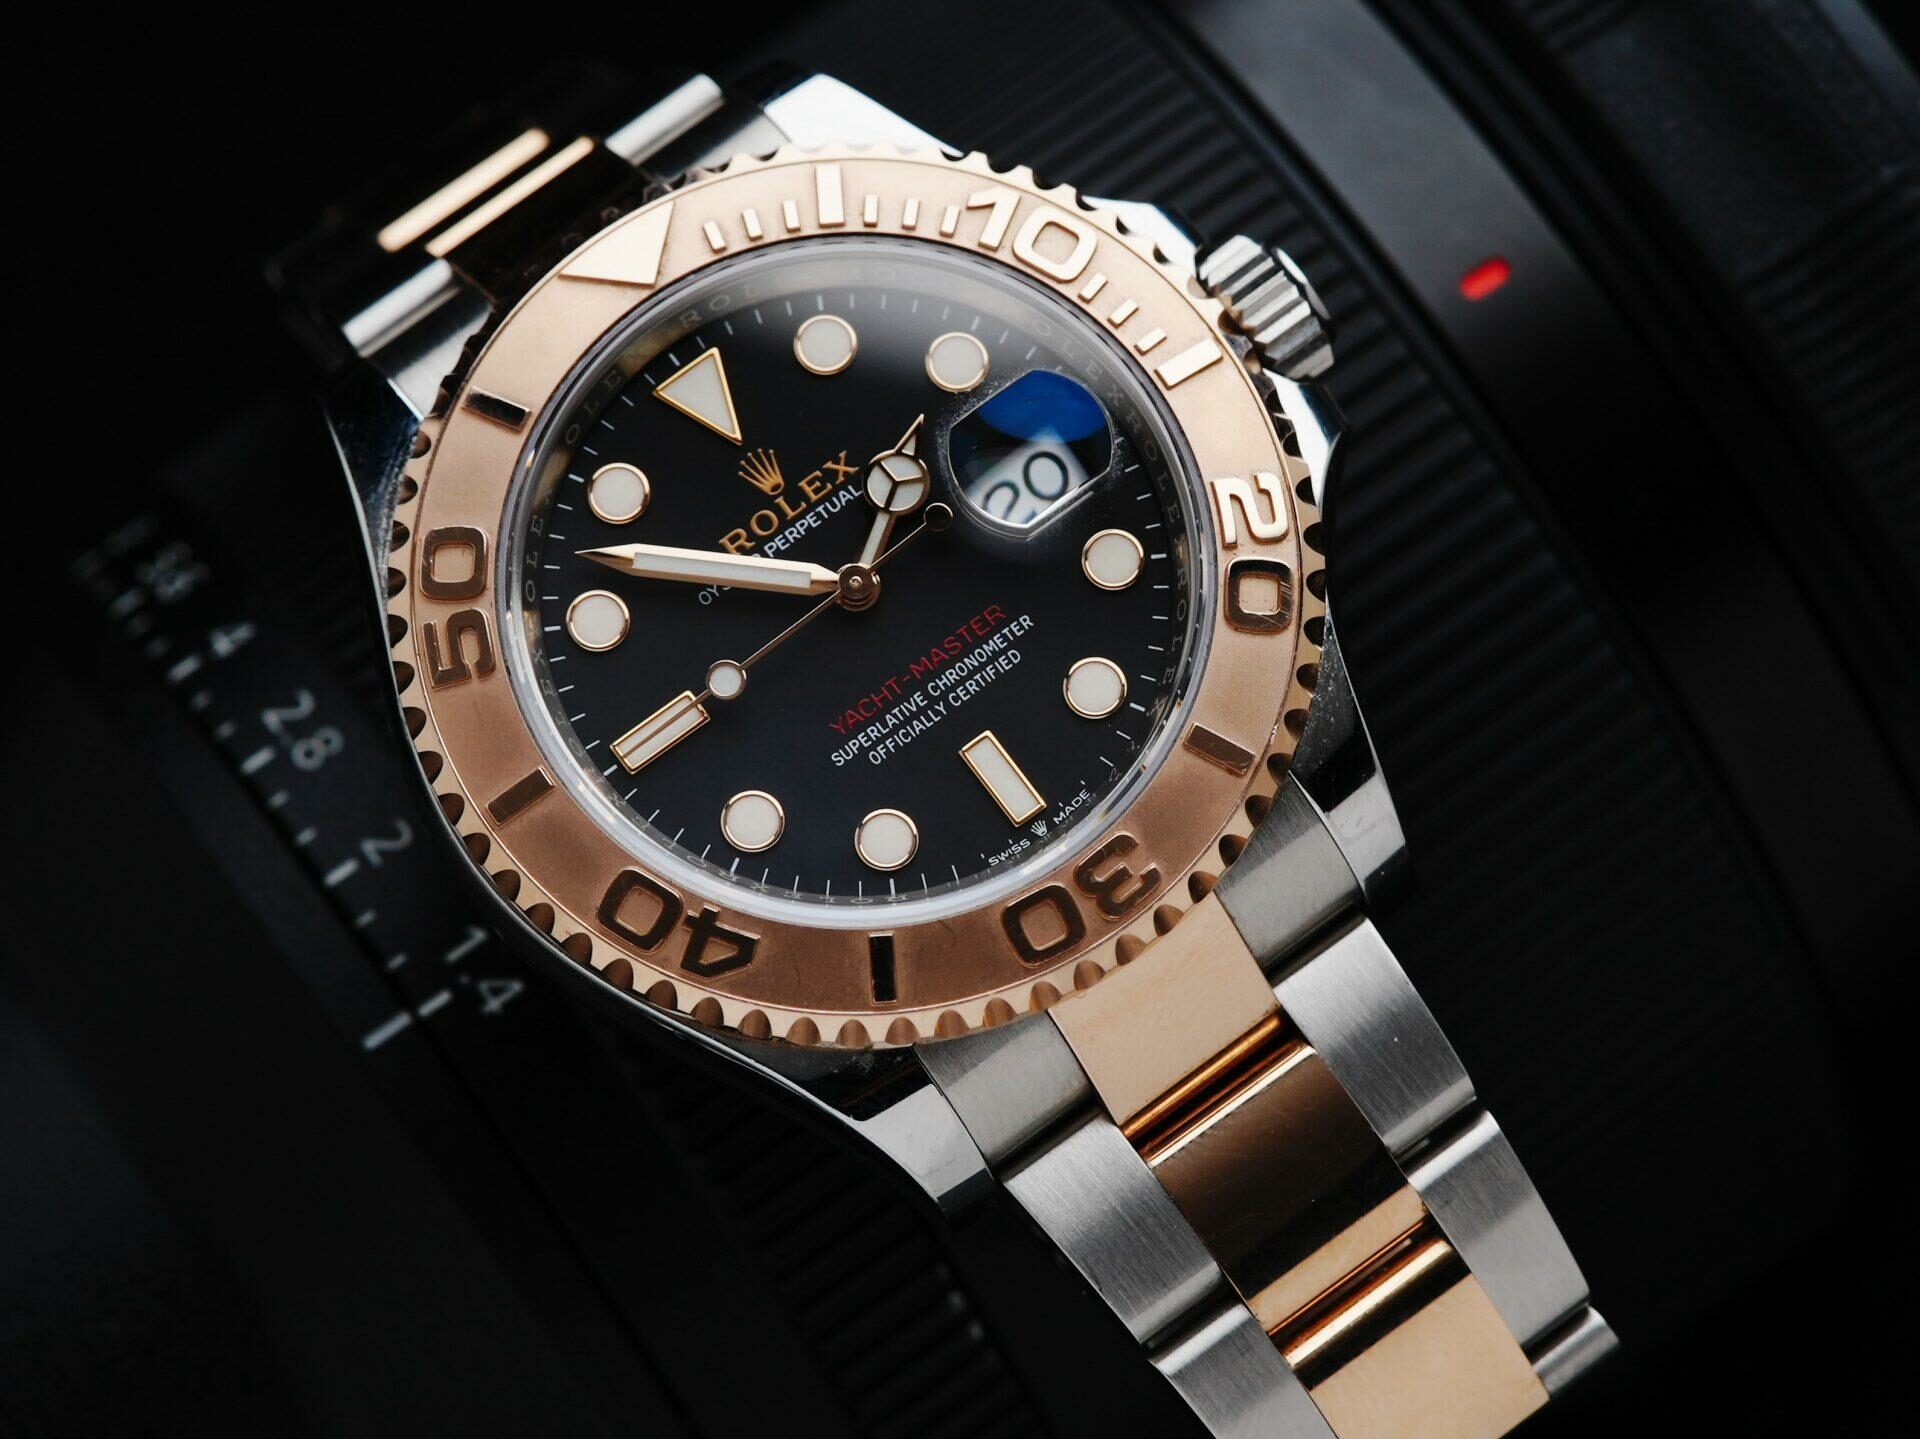 Rolex Yacht-Master 40mm watch with camera in background.